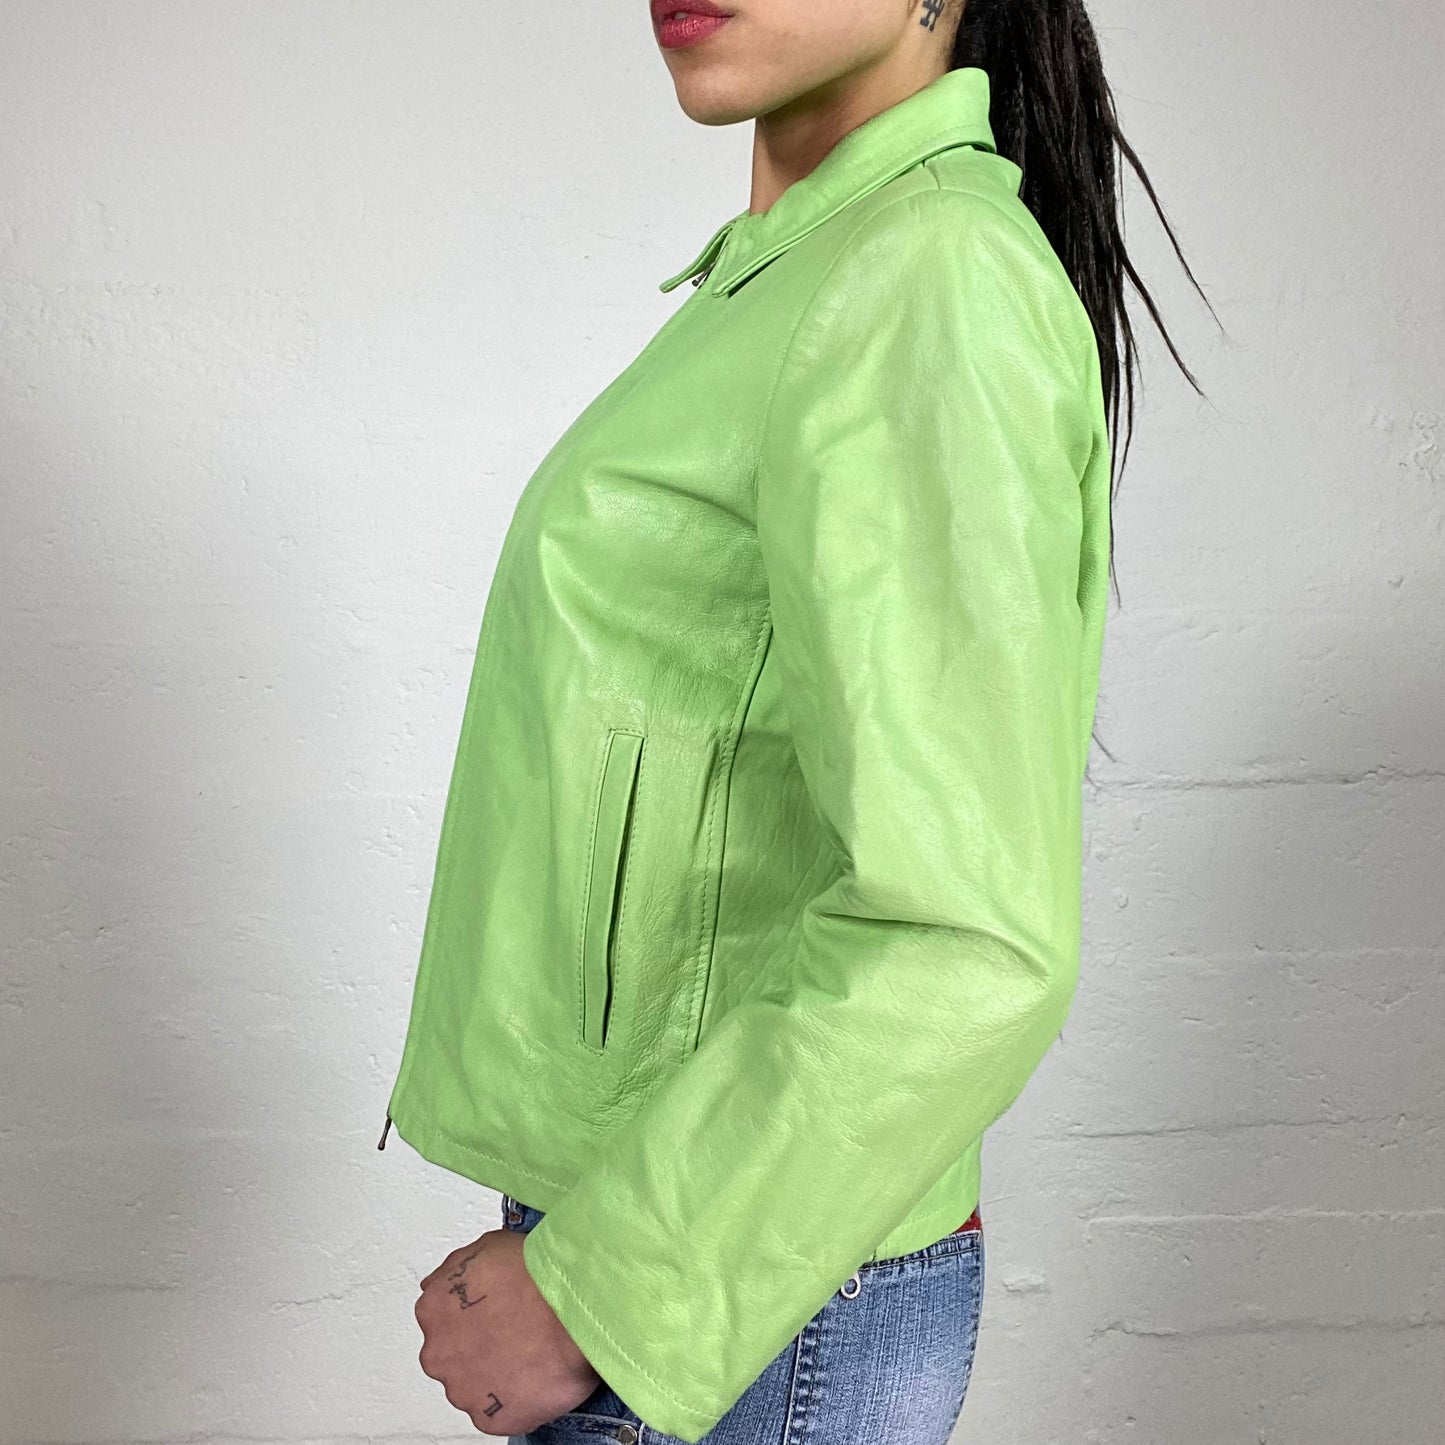 Vintage 90’s Spring Soft Girl Lime Green Zip Up Leather Jacket with Classic Collar (44)